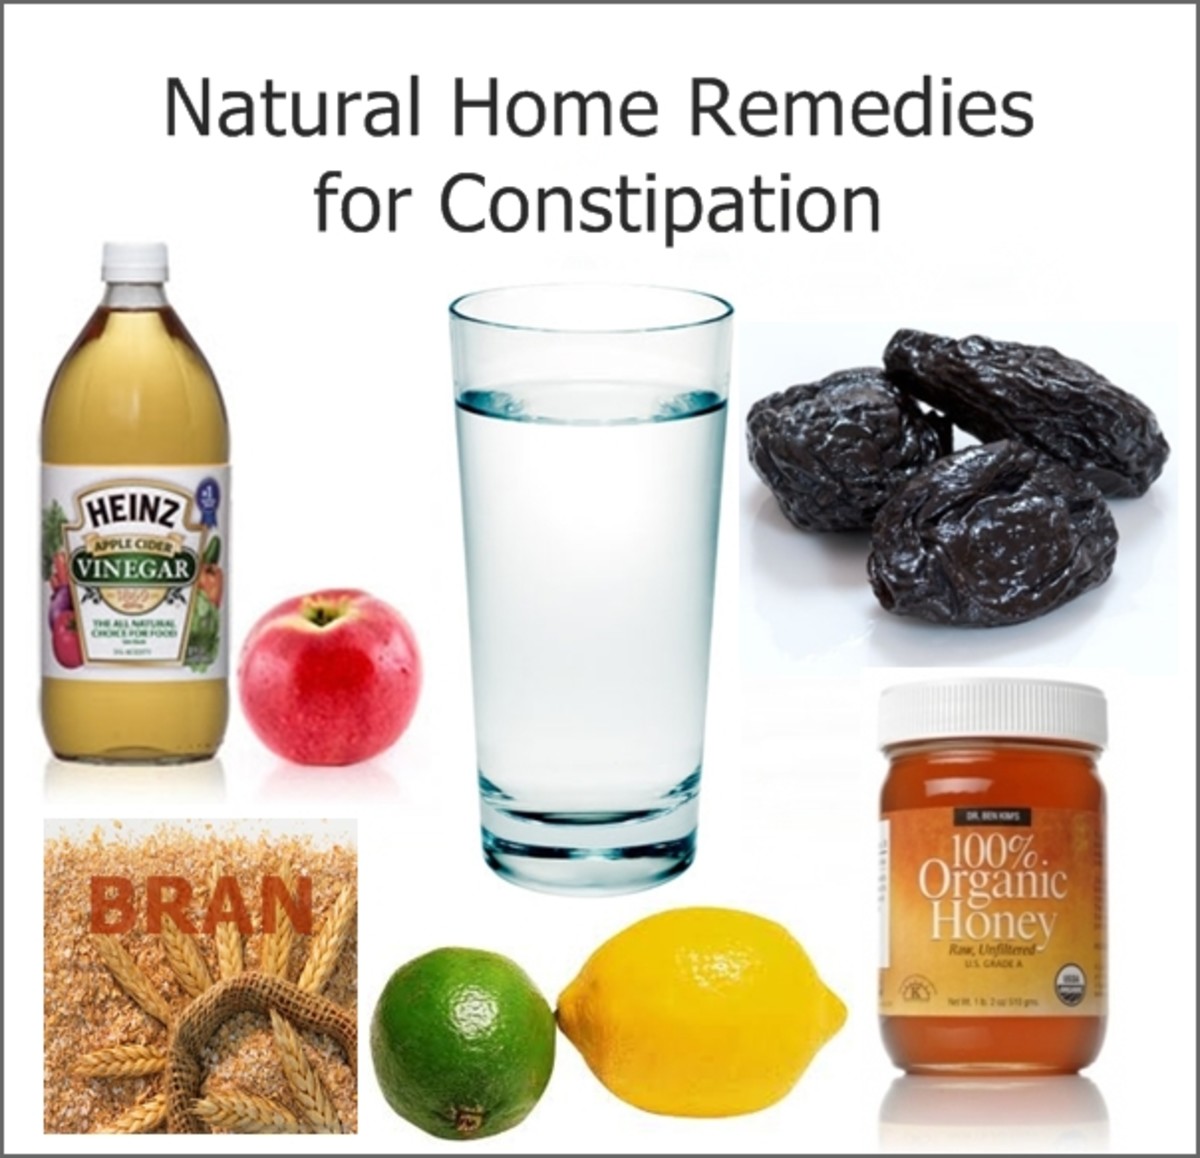 treatments for constipation